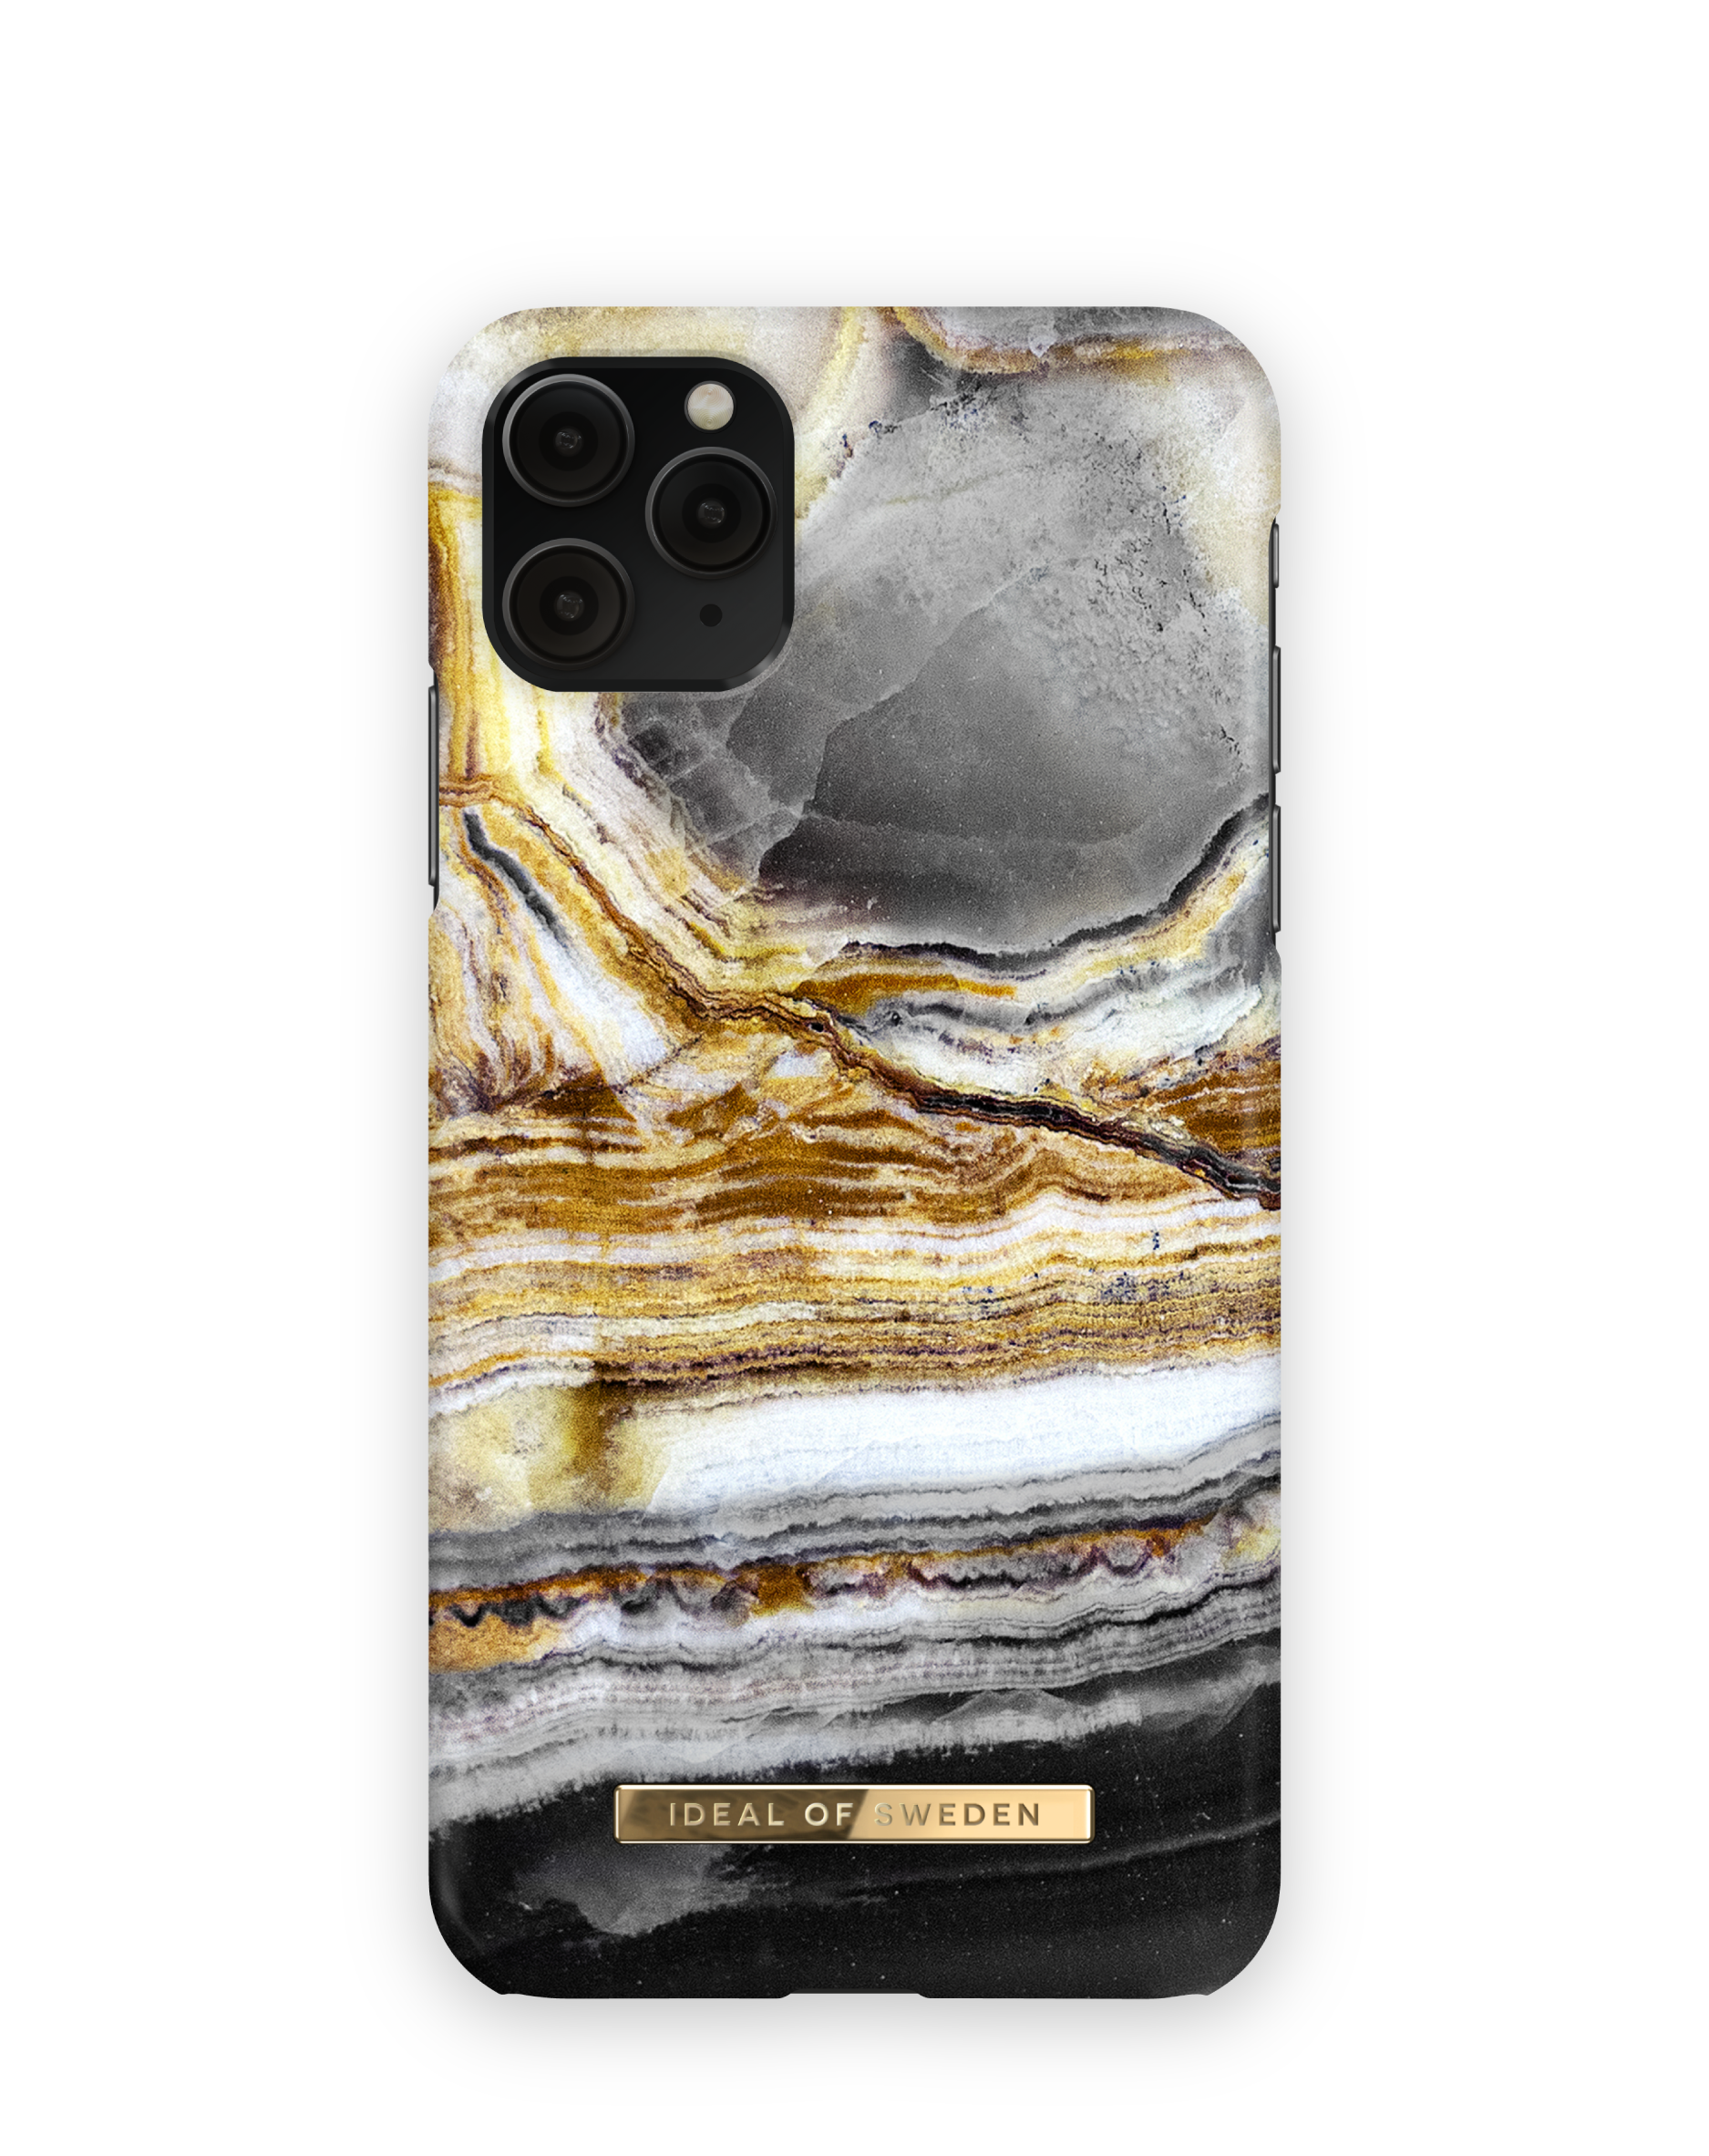 Outer Backcover, Apple Space OF 11 iPhone Pro iPhone Marble XS Apple, Max, IDEAL IDFCAW18-I1965-99, SWEDEN Apple Max,